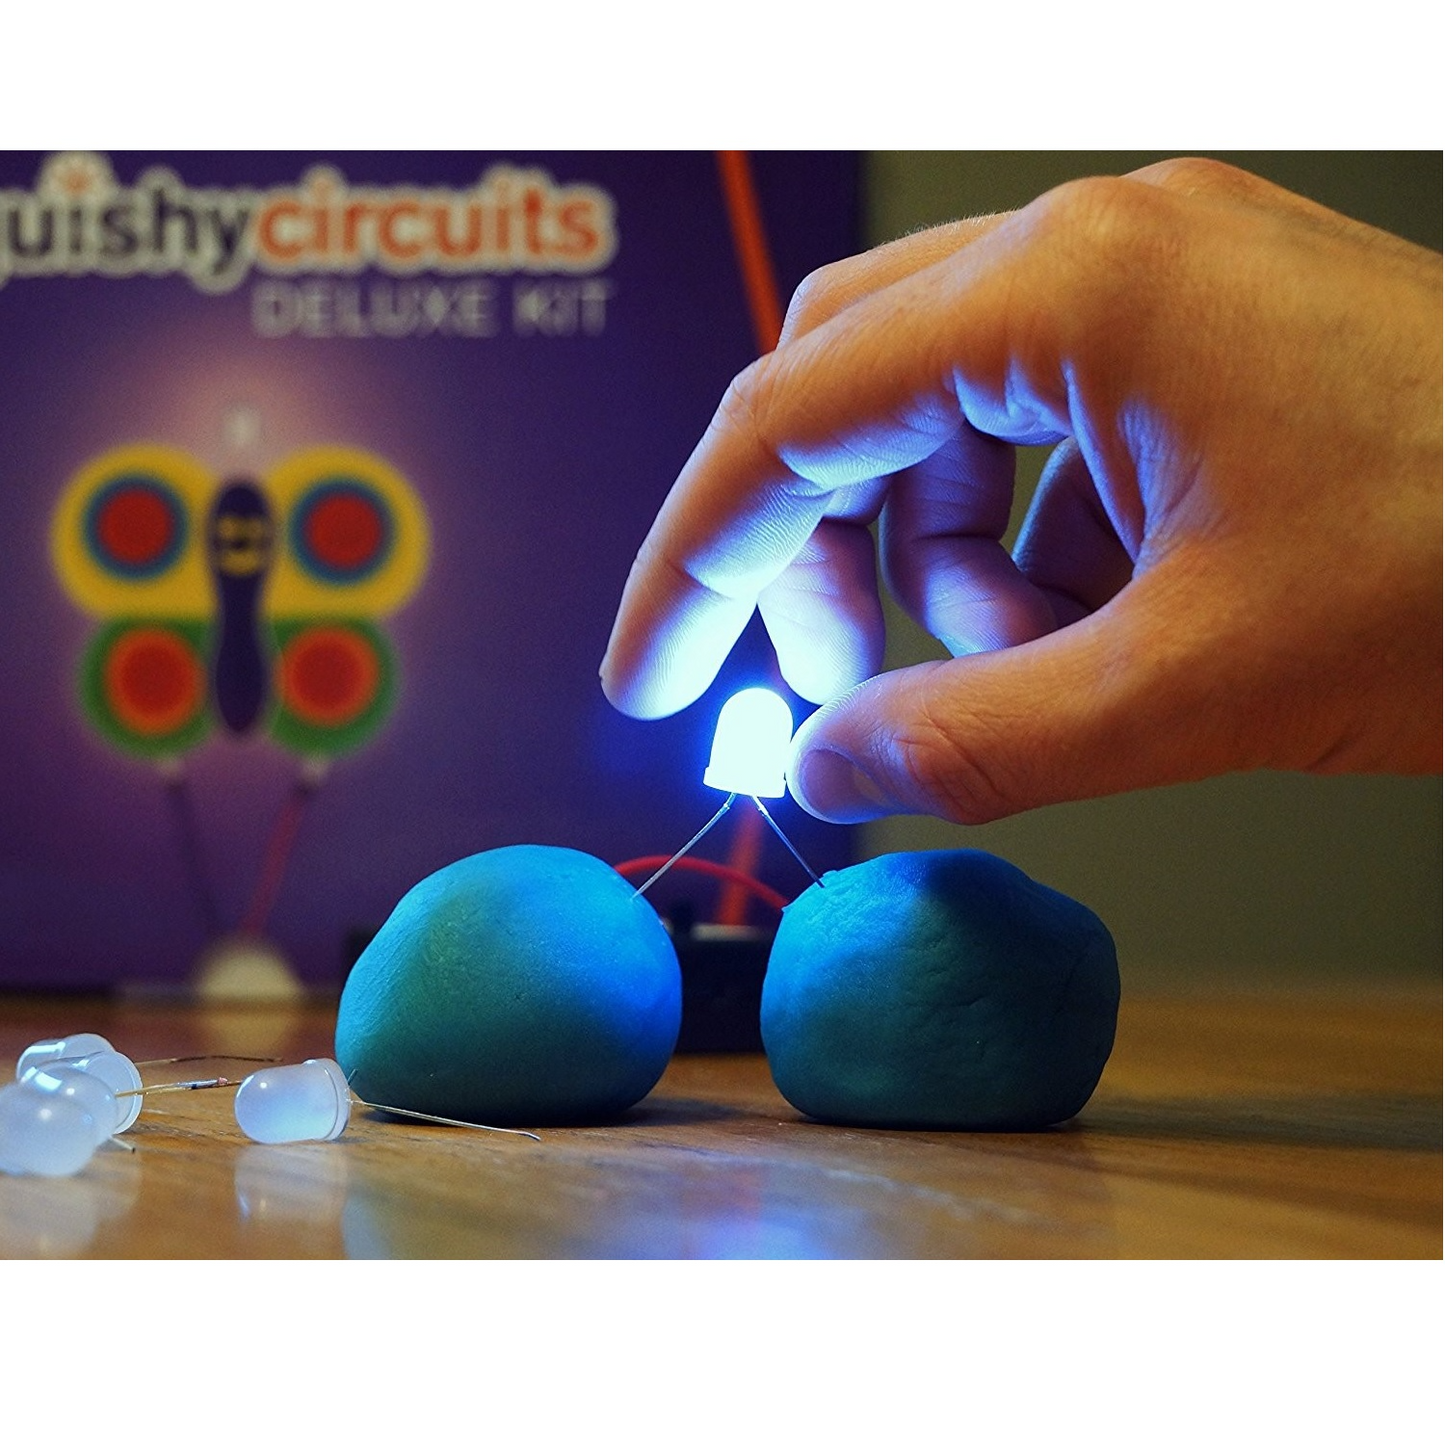 Squishy Circuits Deluxe Kit – ElectricityElectronics Science Fair Projects